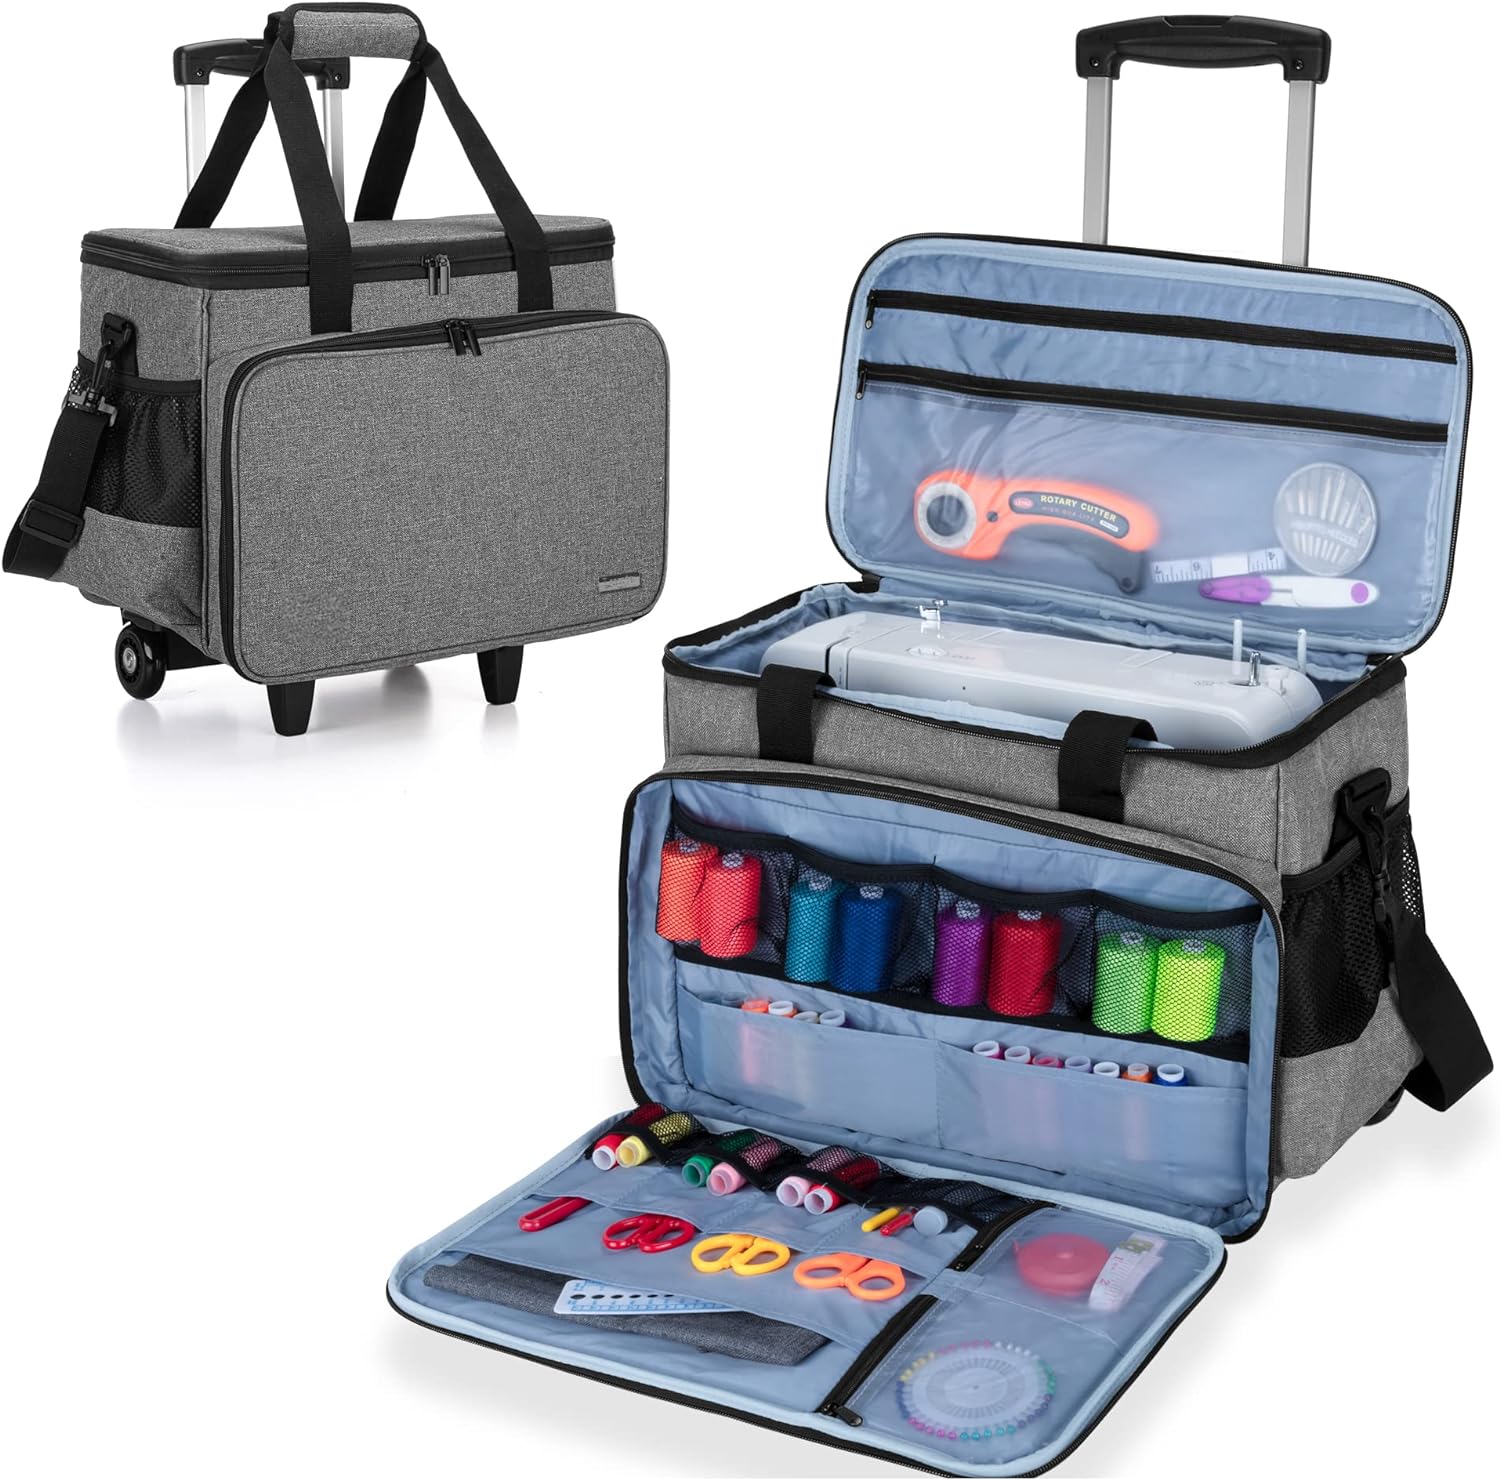 LUXJA Sewing Machine Case with Detachable Dolly and Removable Bottom Pad, Rolling Sewing Machine Tote Fits for Most Standard Sewing Machines, Gray